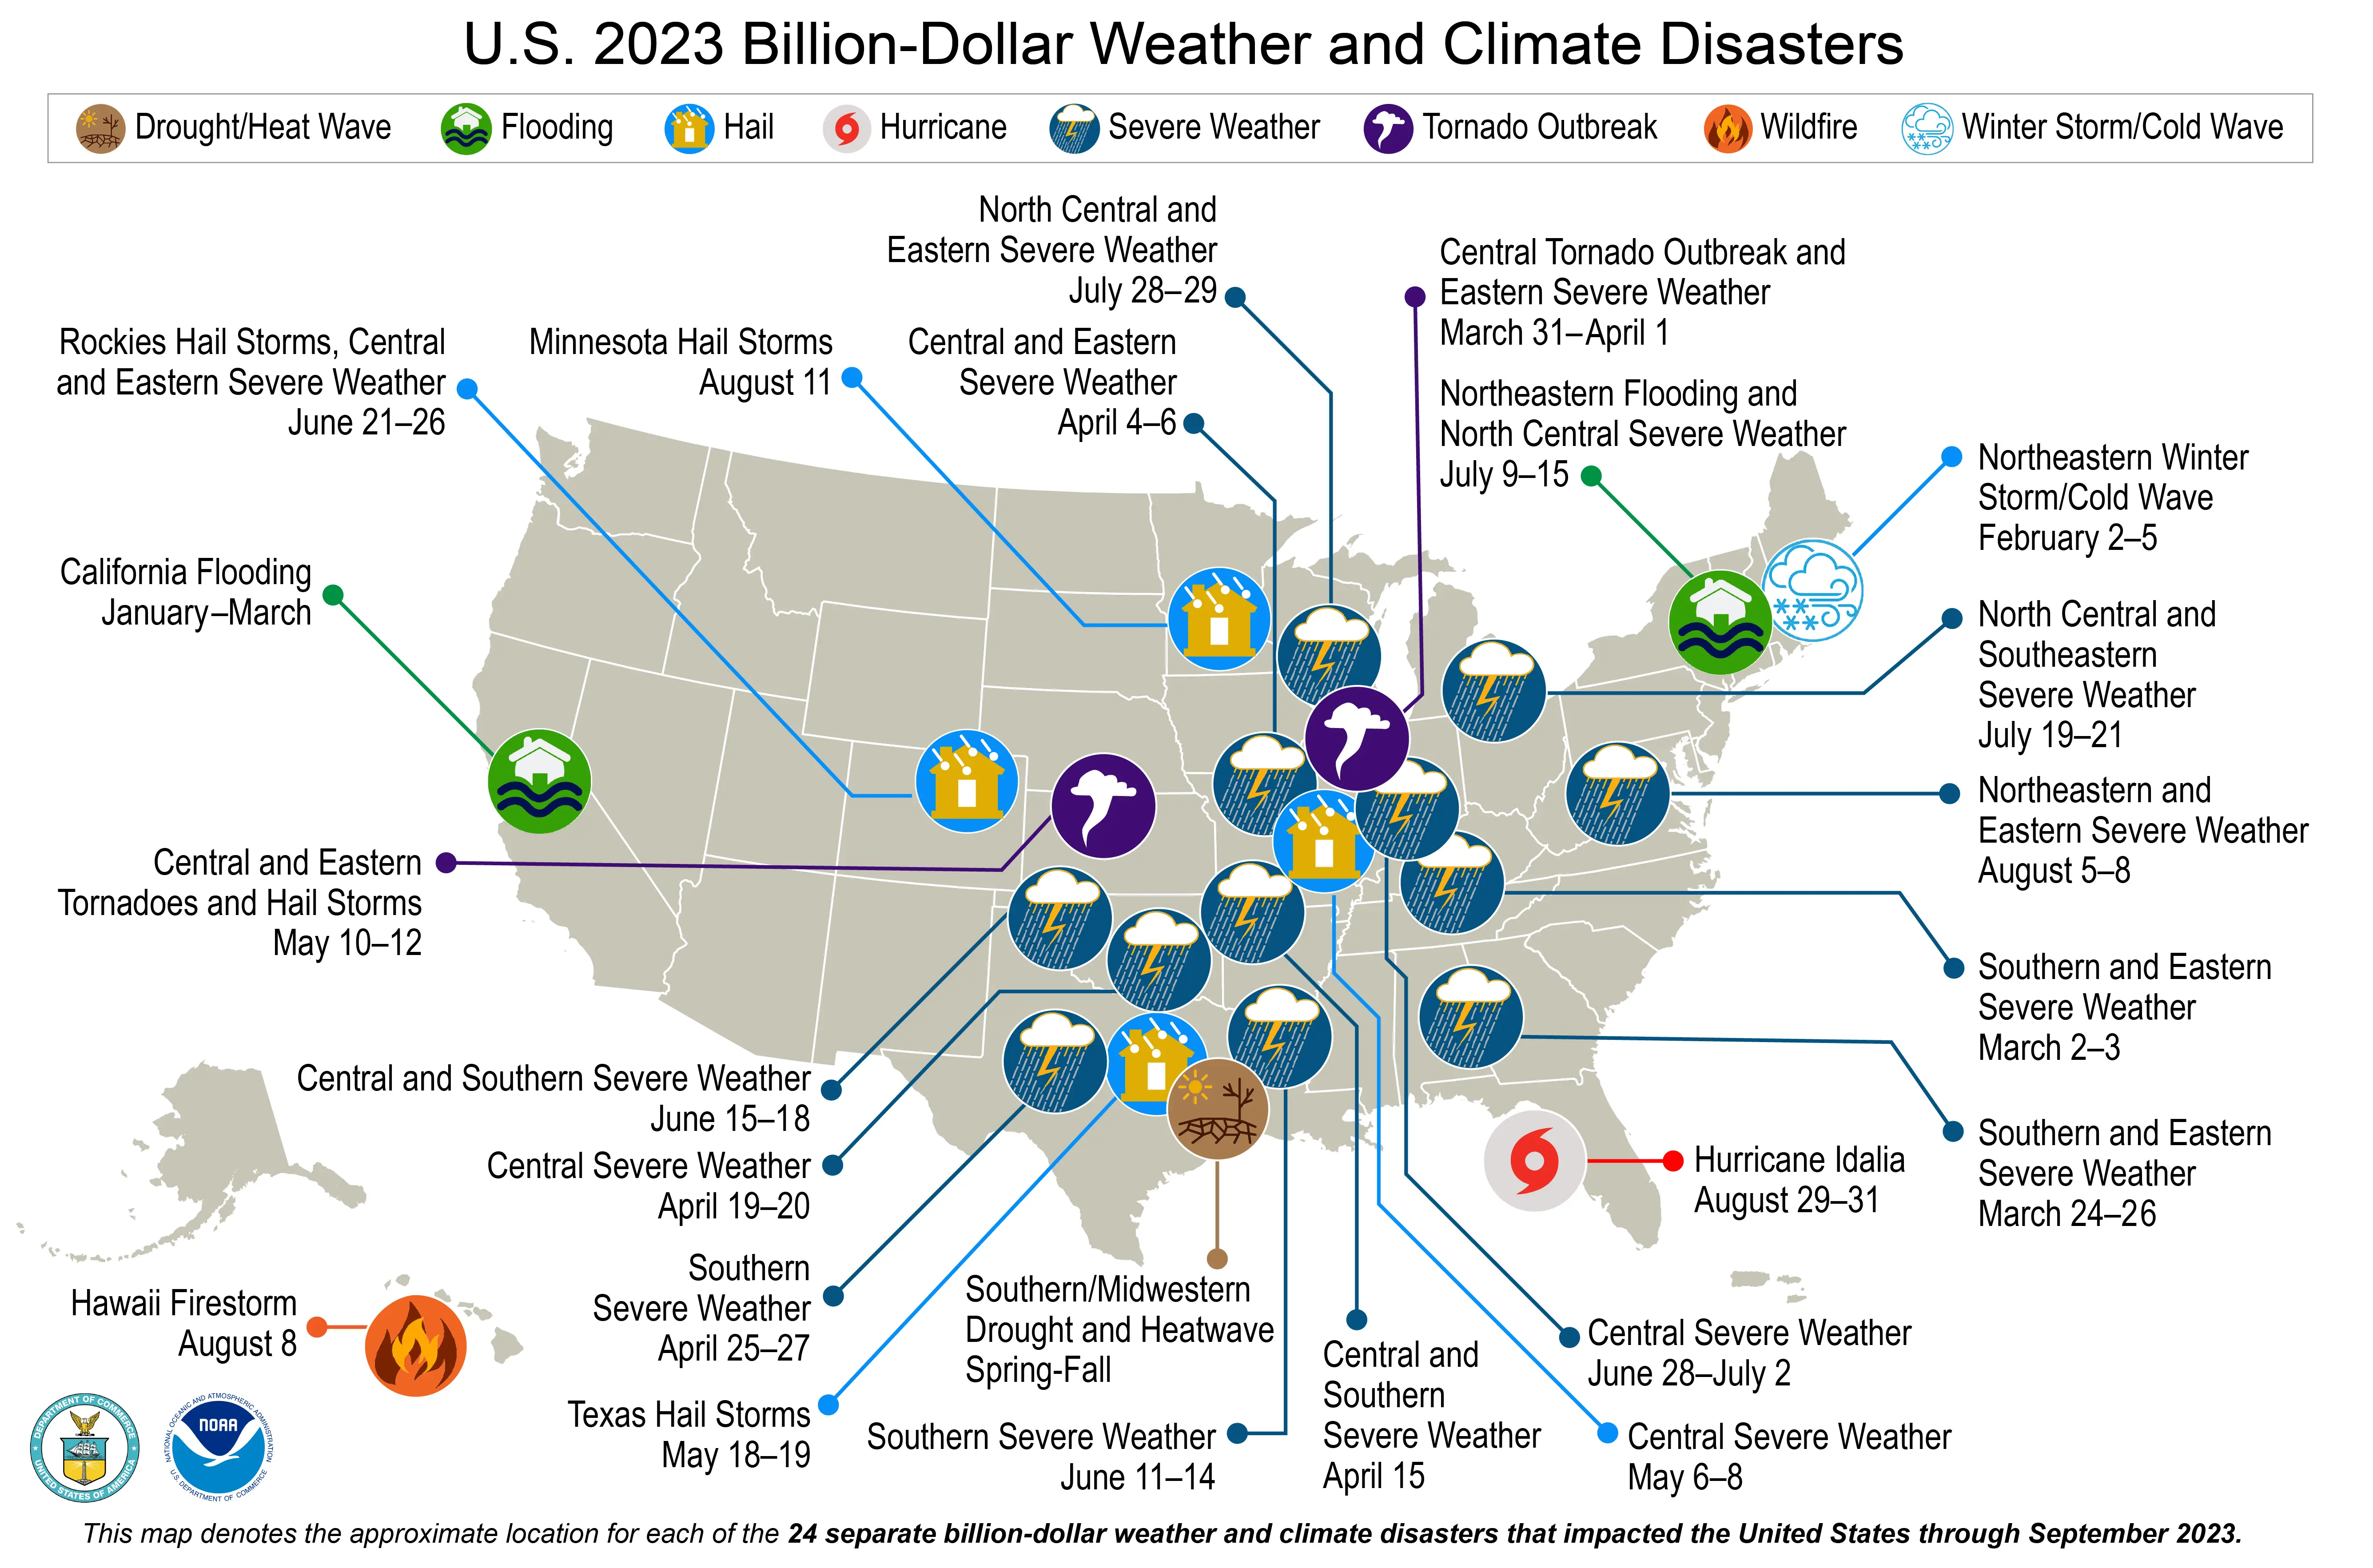 - 24 separate billion-dollar weather and climate disasters that impacted the United States throughout 2023